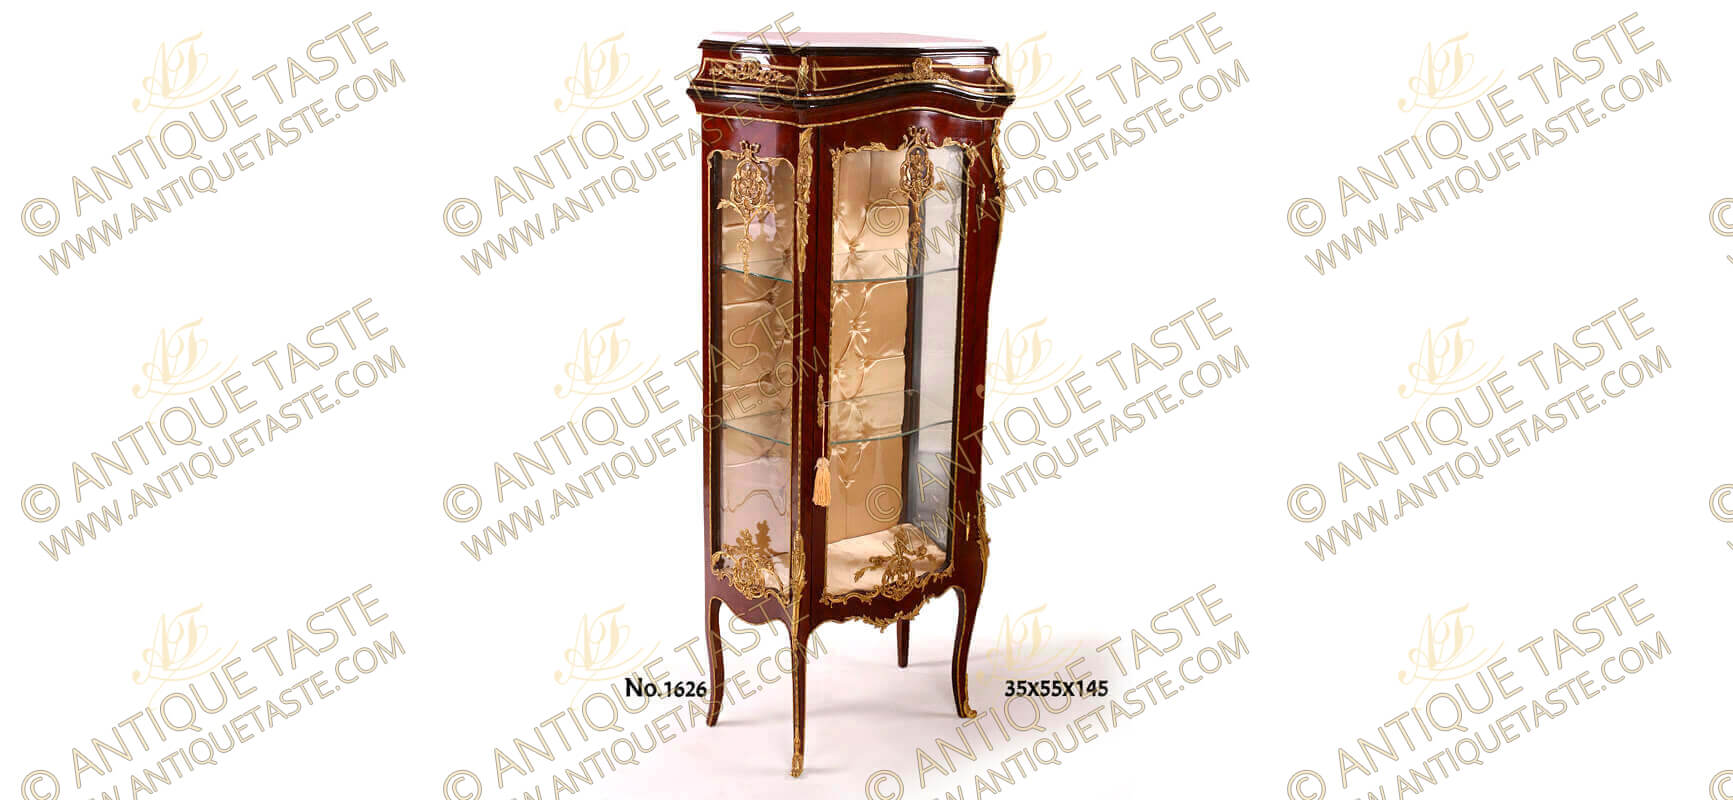 Reproductions French Corner XV Furniture XVI Cabinet, Louis Vitrine, style Display Louis